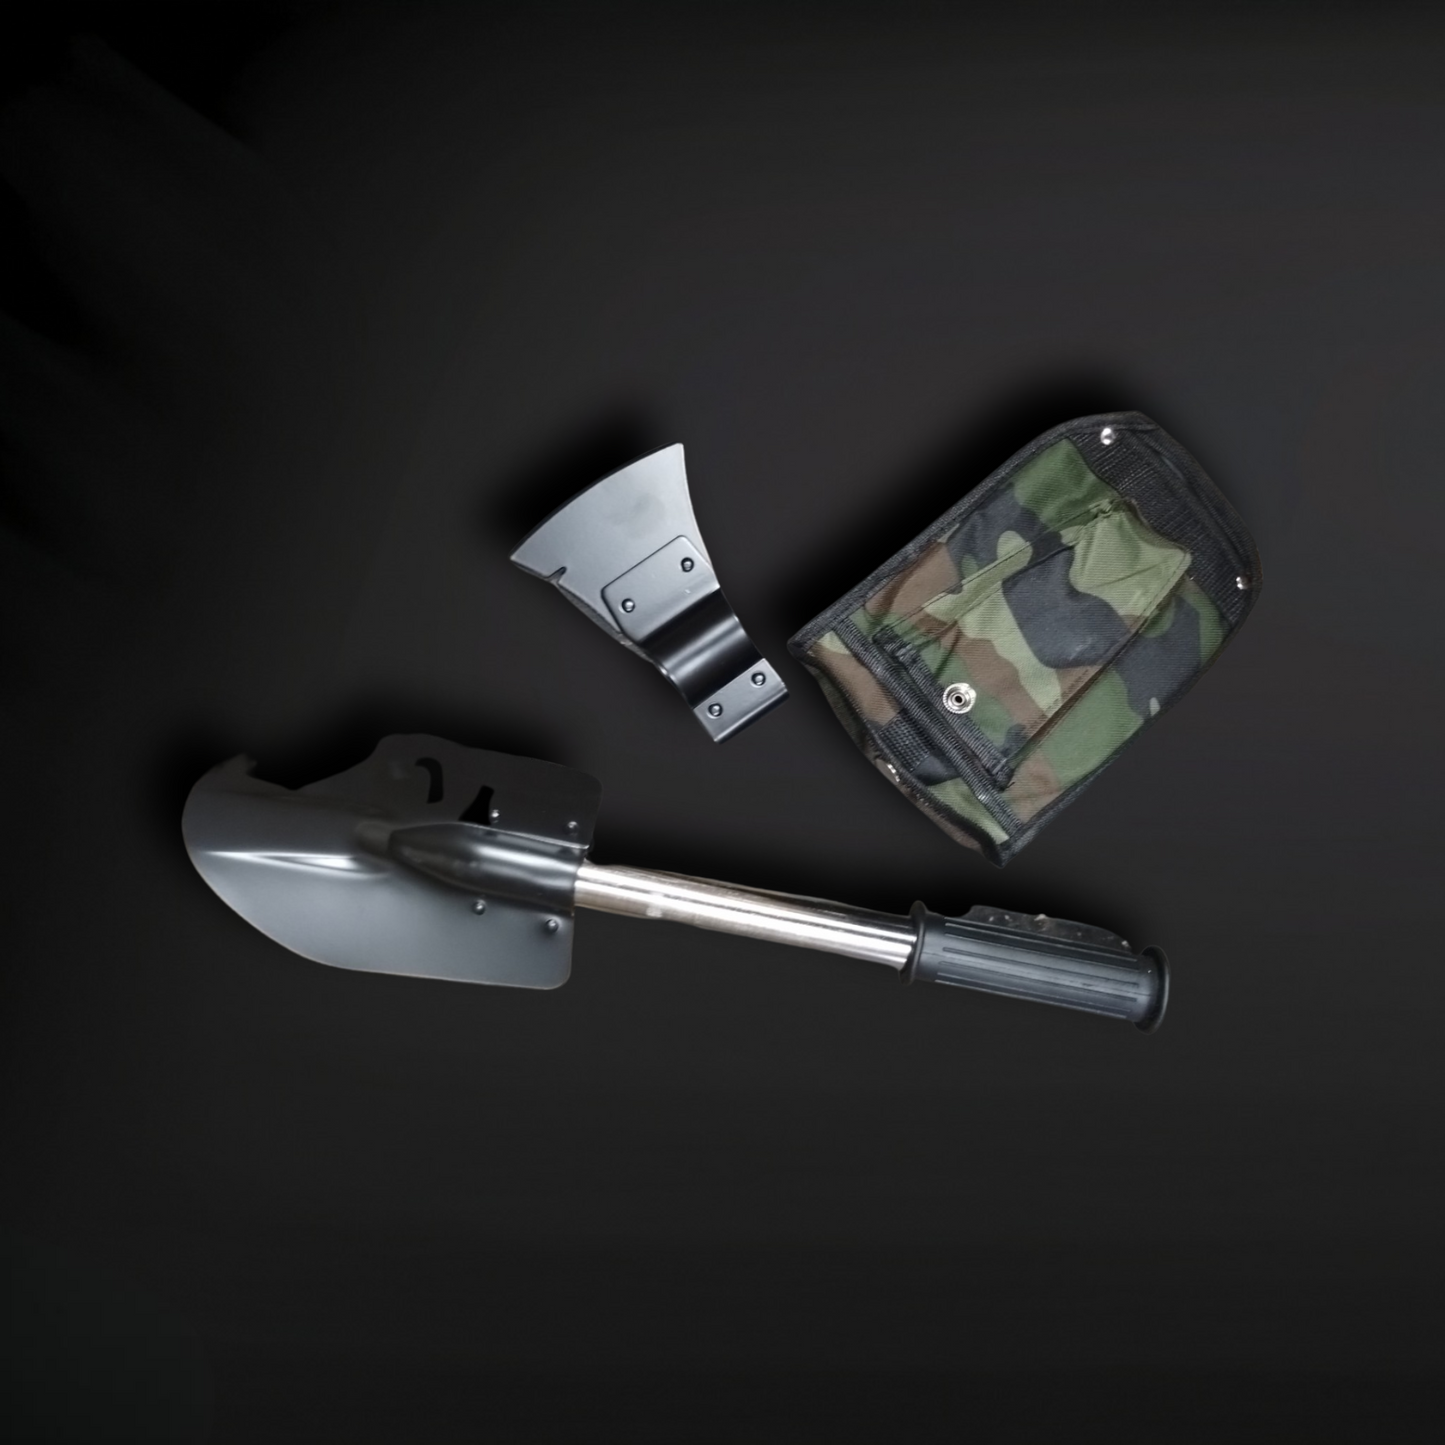 Camping Shovel featuring an Interchangeable Axe Head and Camo Cover. - Zack Wholesale